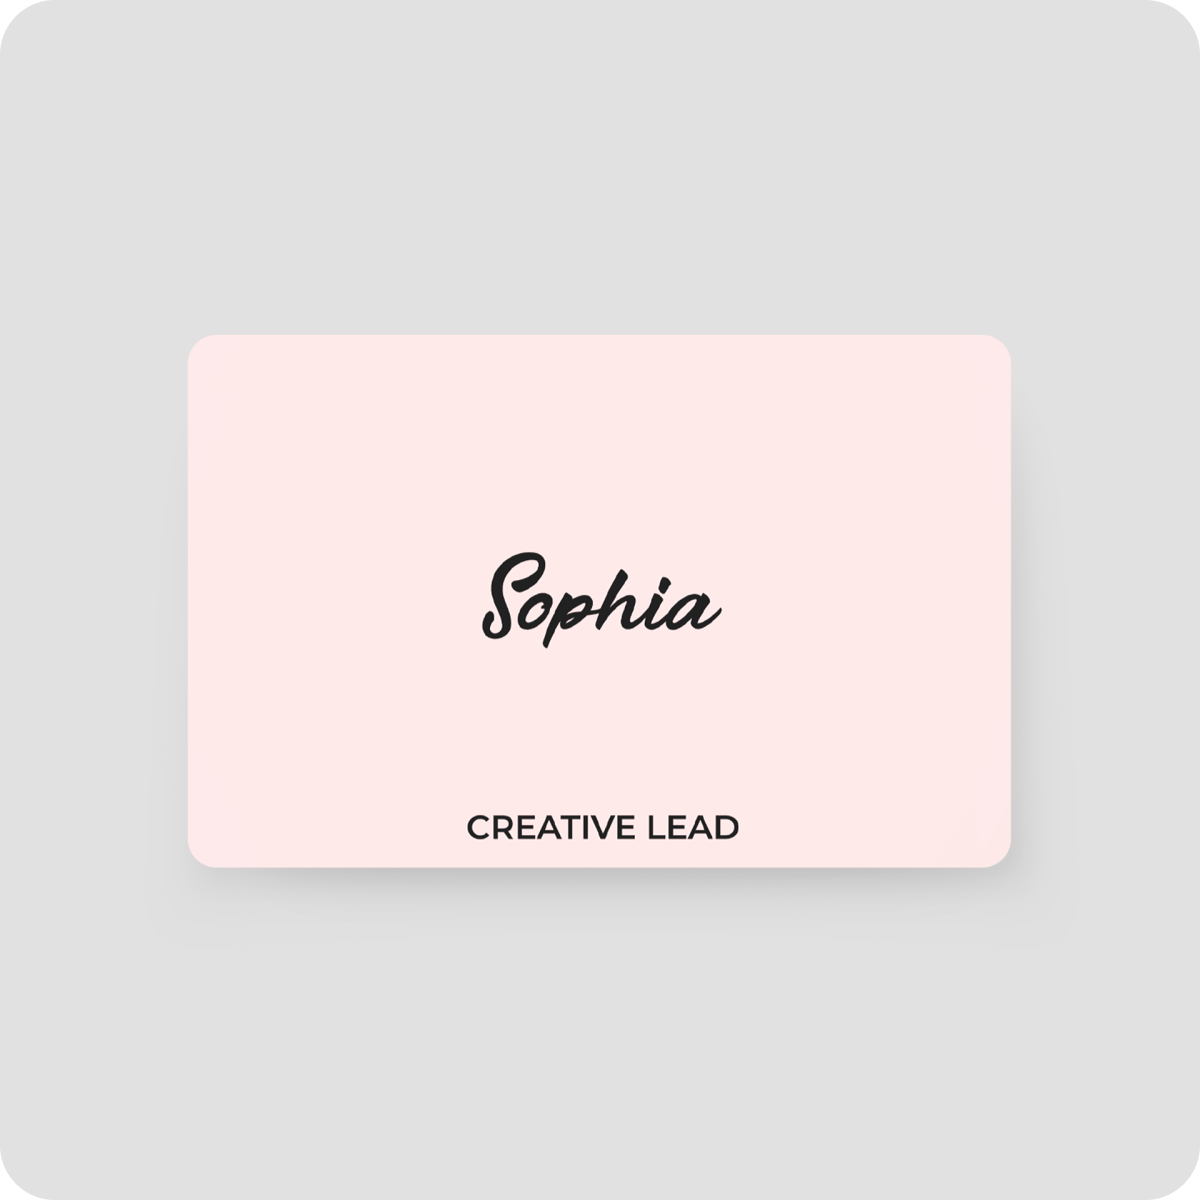 One Good Card: Smart Digital Name Card (Marker) - Personalised Near Field Communication (NFC) Digital Business Cards designs - Baby Pink